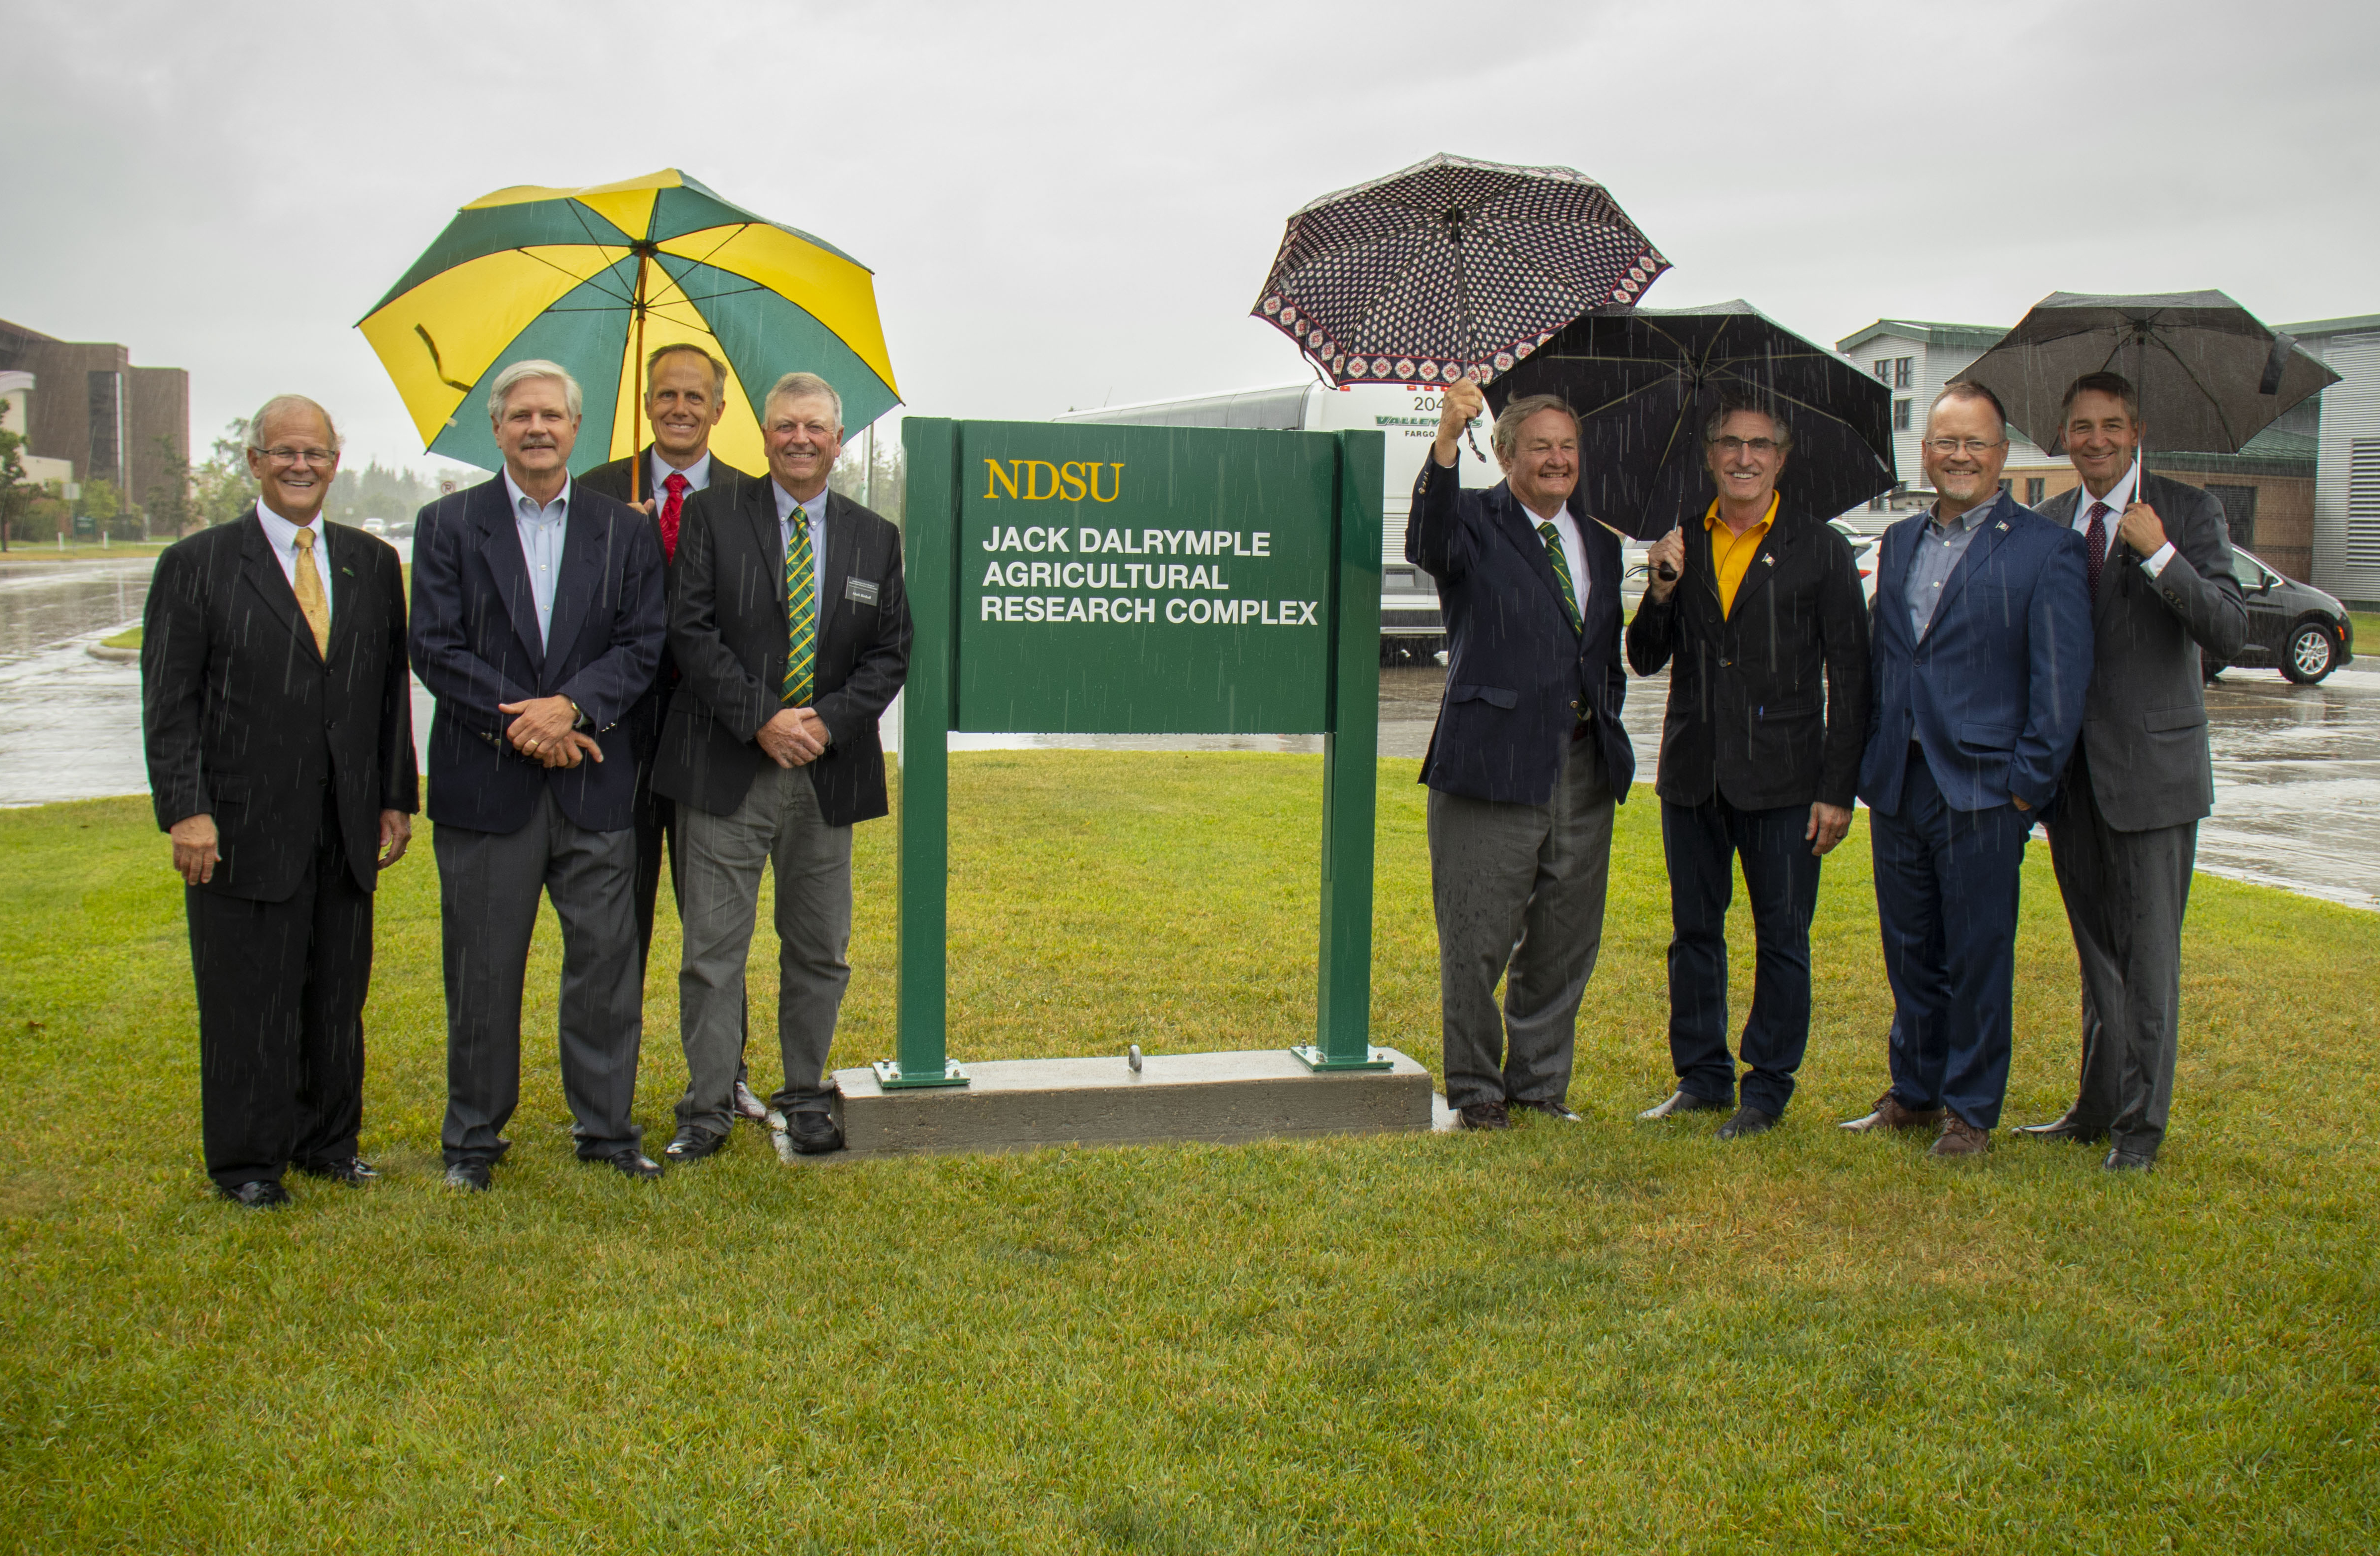 NDSU's state-of-the-art greenhouse complex now is the Jack Dalrymple Agricultural Research Complex. (L to R): NDSU President Dean Bresciani, Senator John Hoeven, Vice President for Agricultural Affairs Greg Lardy, SBARE Chair Mark Birdsall, former Governor Jack Dalrymple, Governor Doug Burgum, Lieutenant Governor Brent Sanford and former Lieutenant Governor Drew Wrigley. (NDSU Photo)